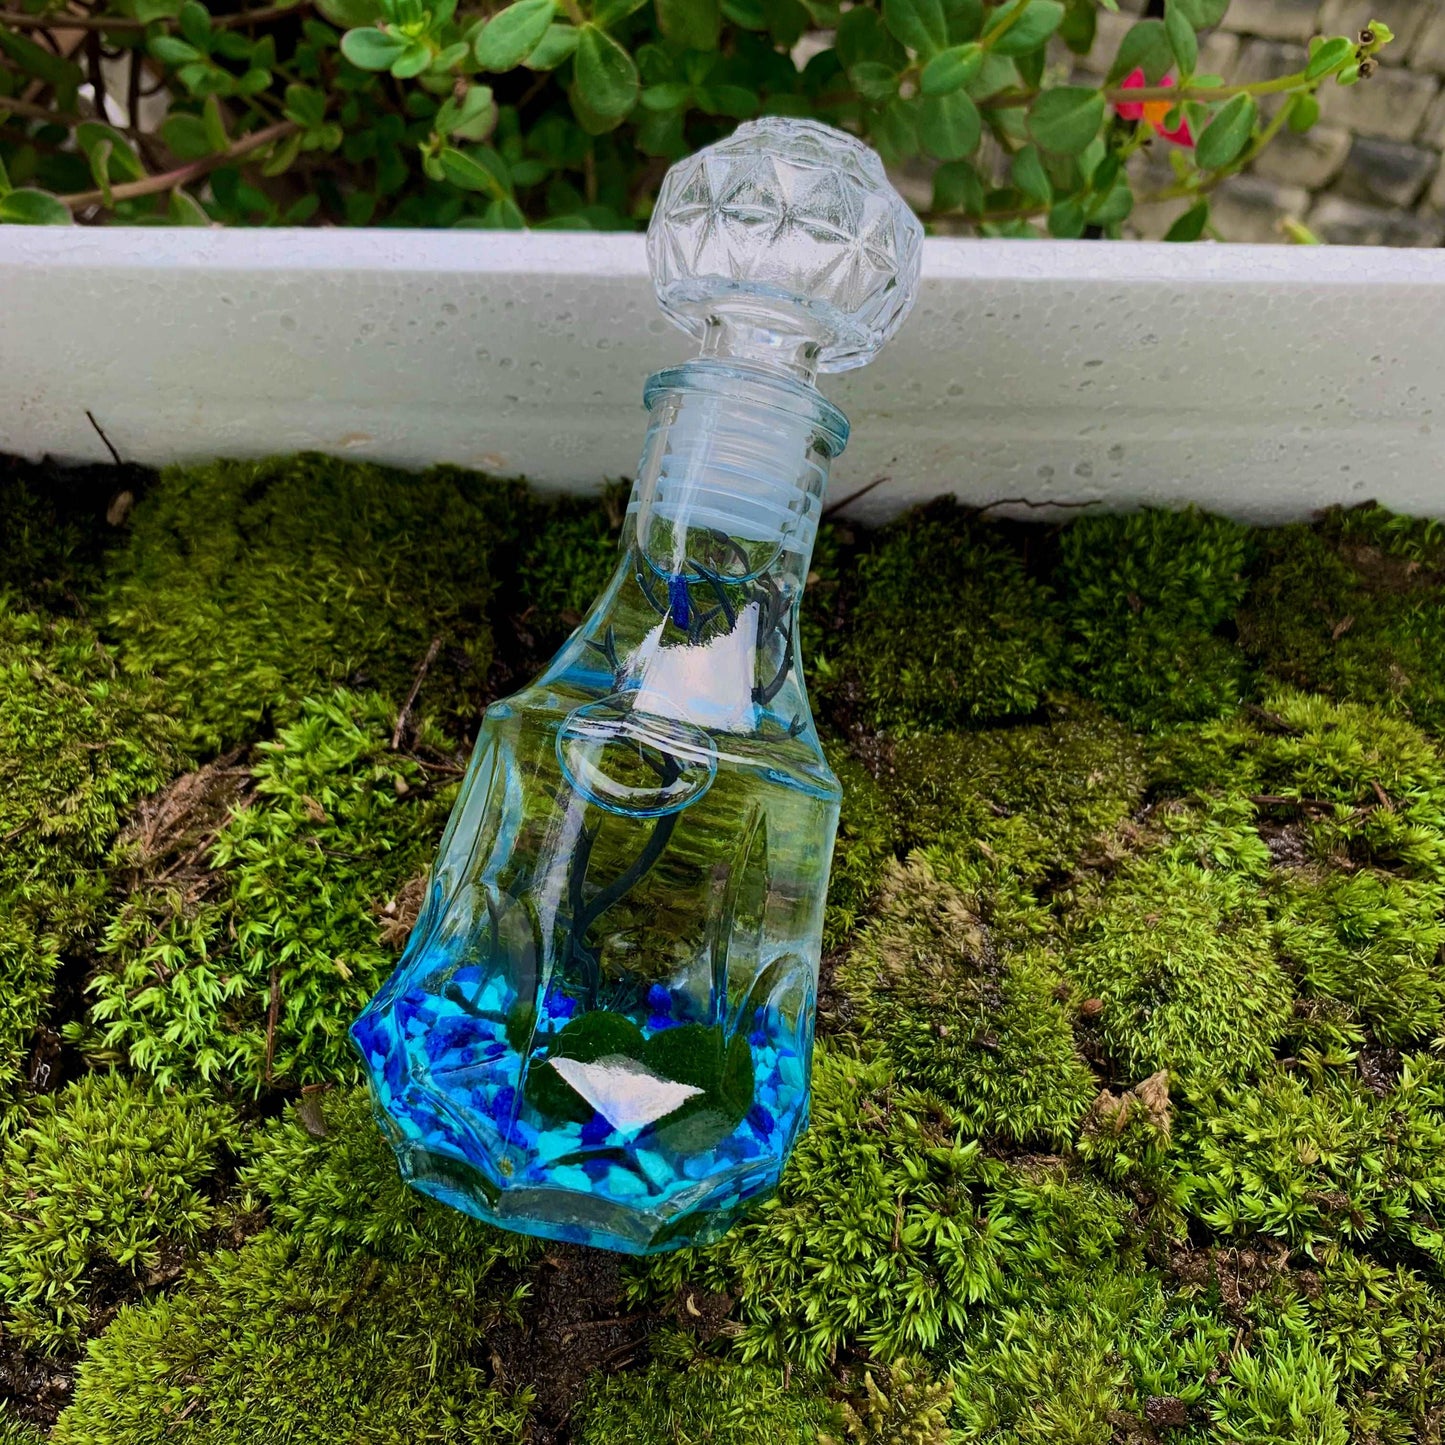 Romantic Marimo Moss Balls Glass Bottle Aquarium With Lid Love Plants for Beginners for Couples Blue